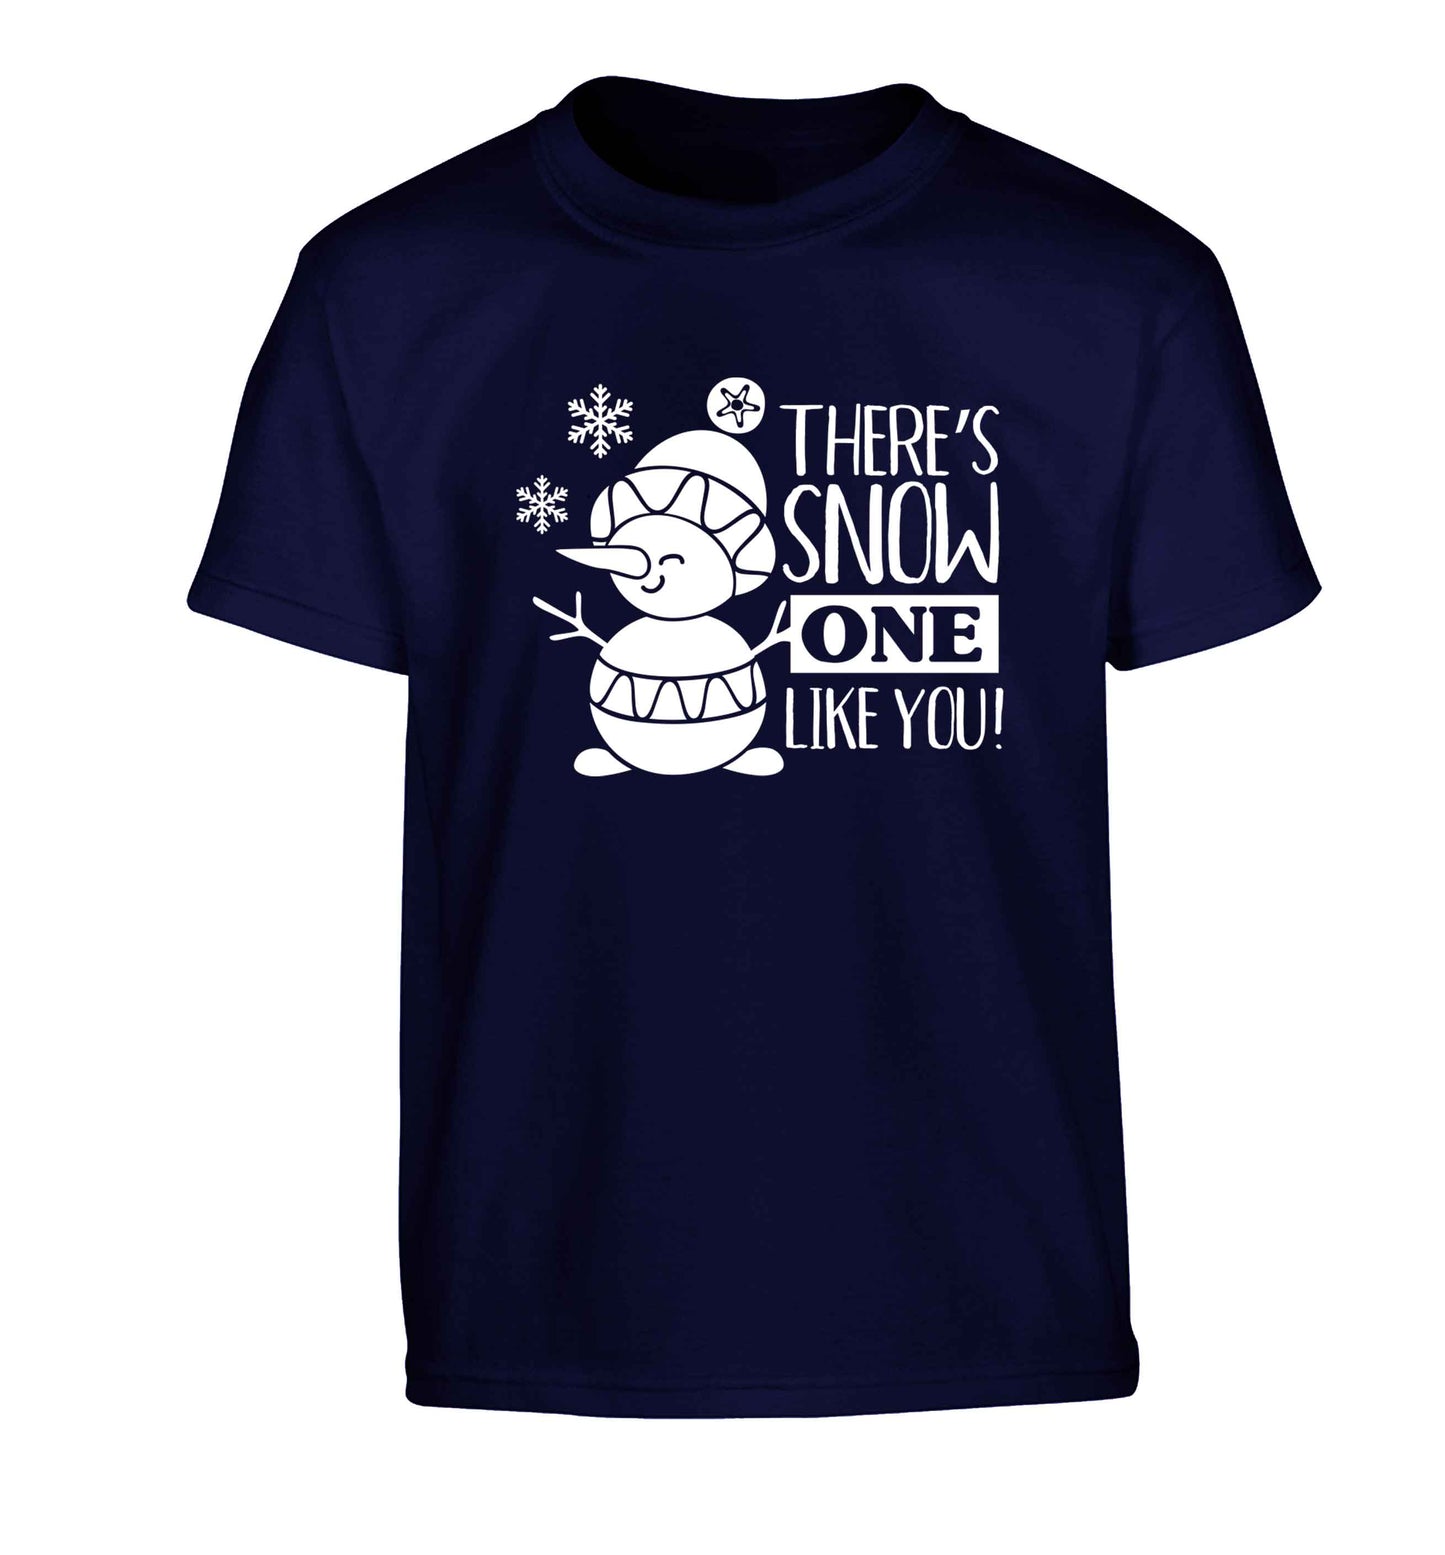 There's snow one like you Children's navy Tshirt 12-13 Years